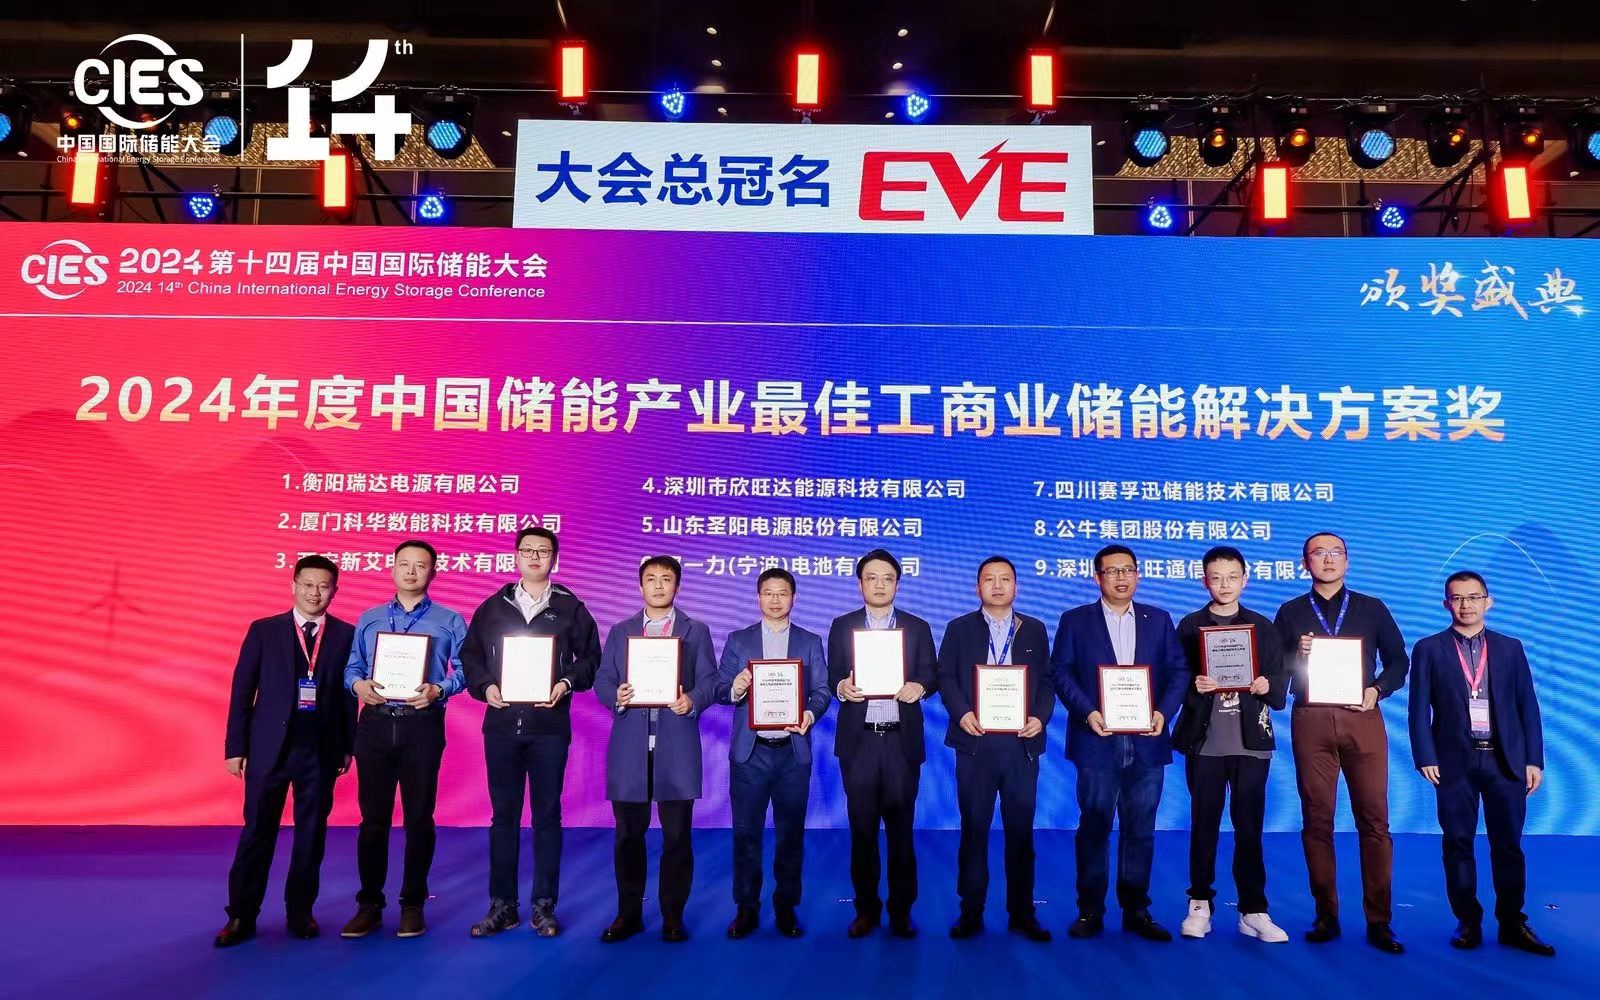 SFQ Garners Recognition at Energy Storage Conference, Wins “2024 China’s Best Industr...